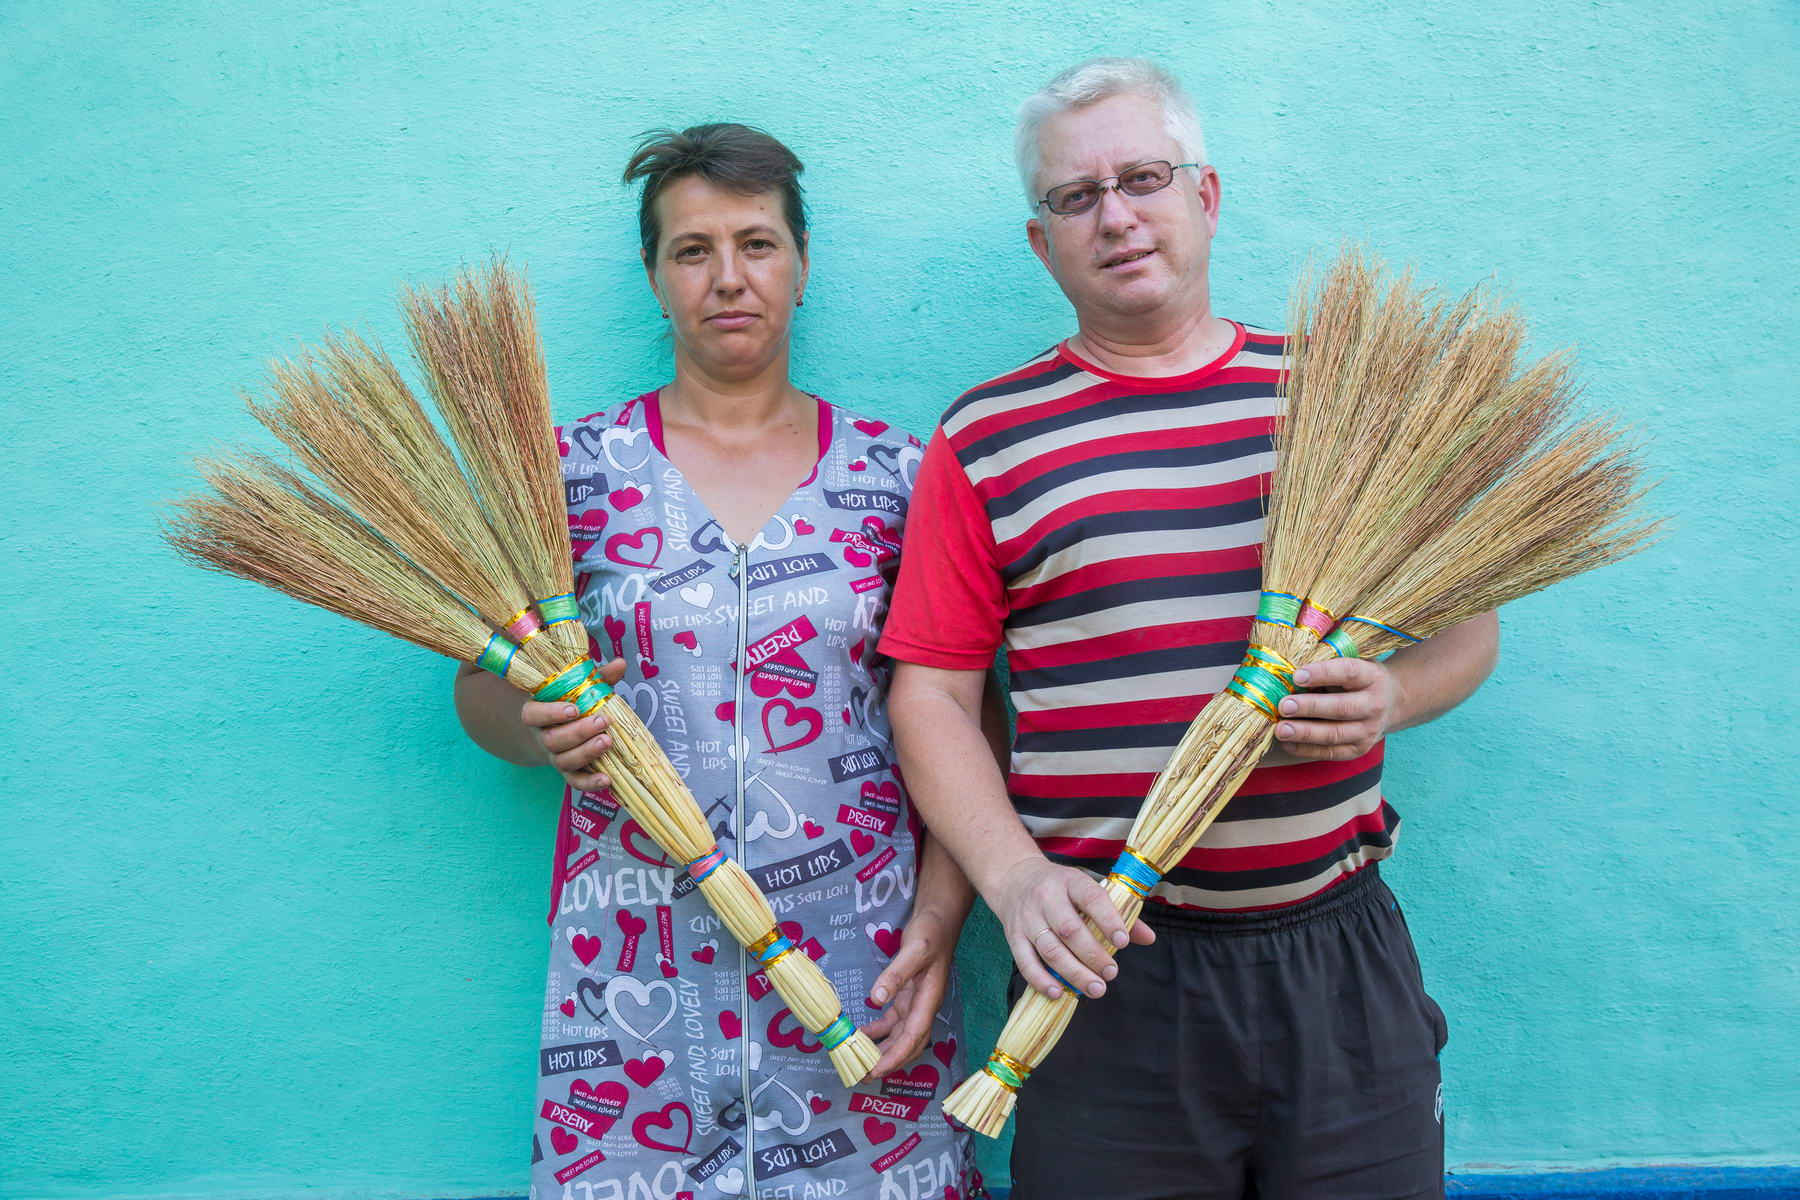 Vasyl and Tetiana with their brooms ~